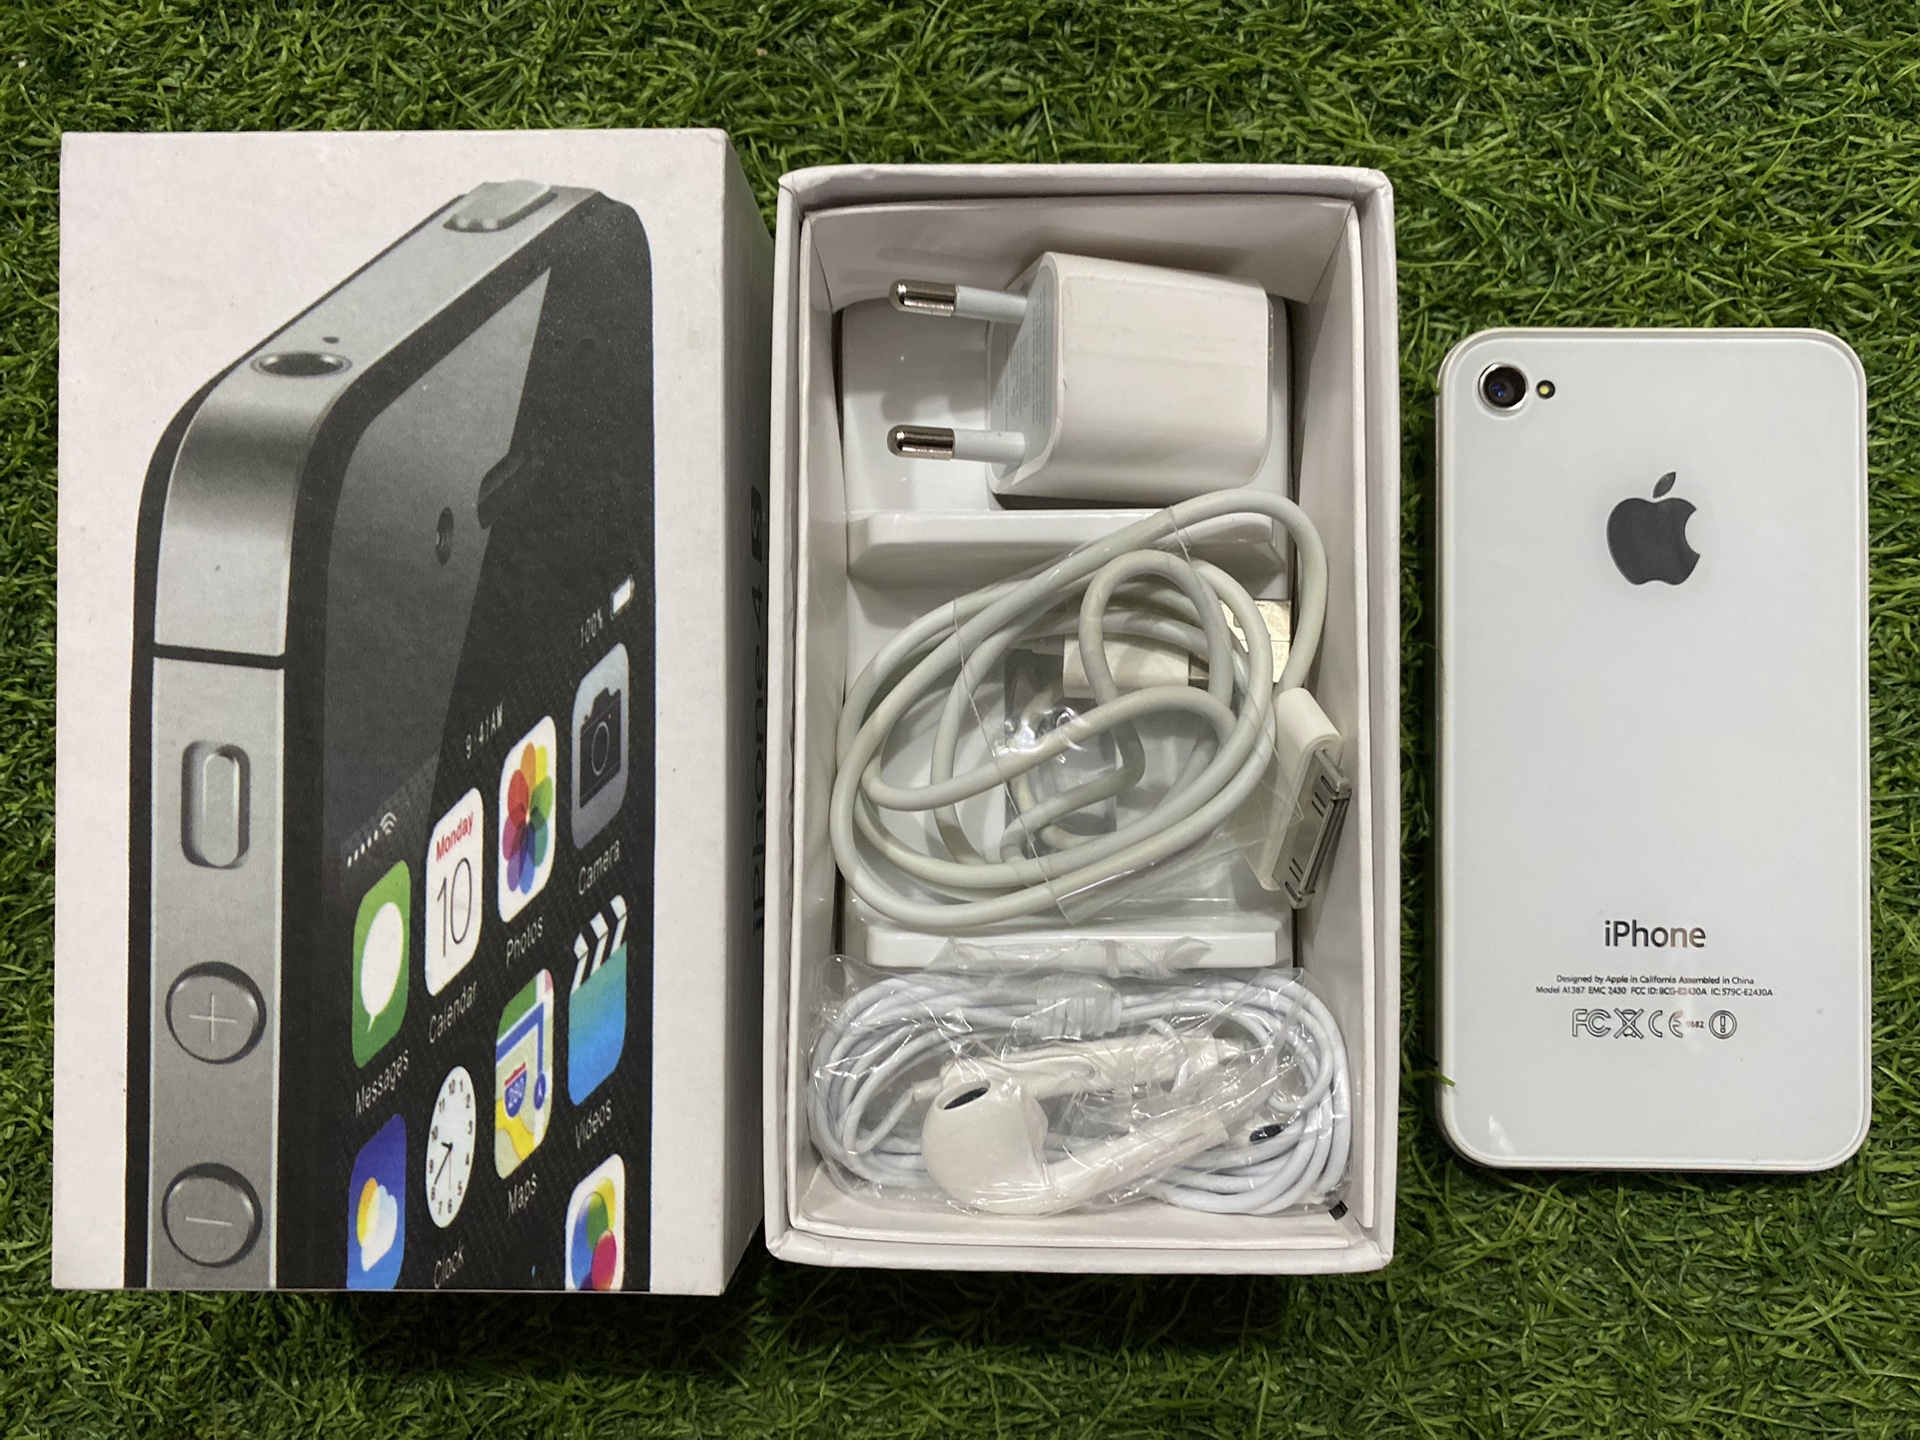 Apple iPhone 4s 16GB With Box and Accessories 3 Month Warranty - White